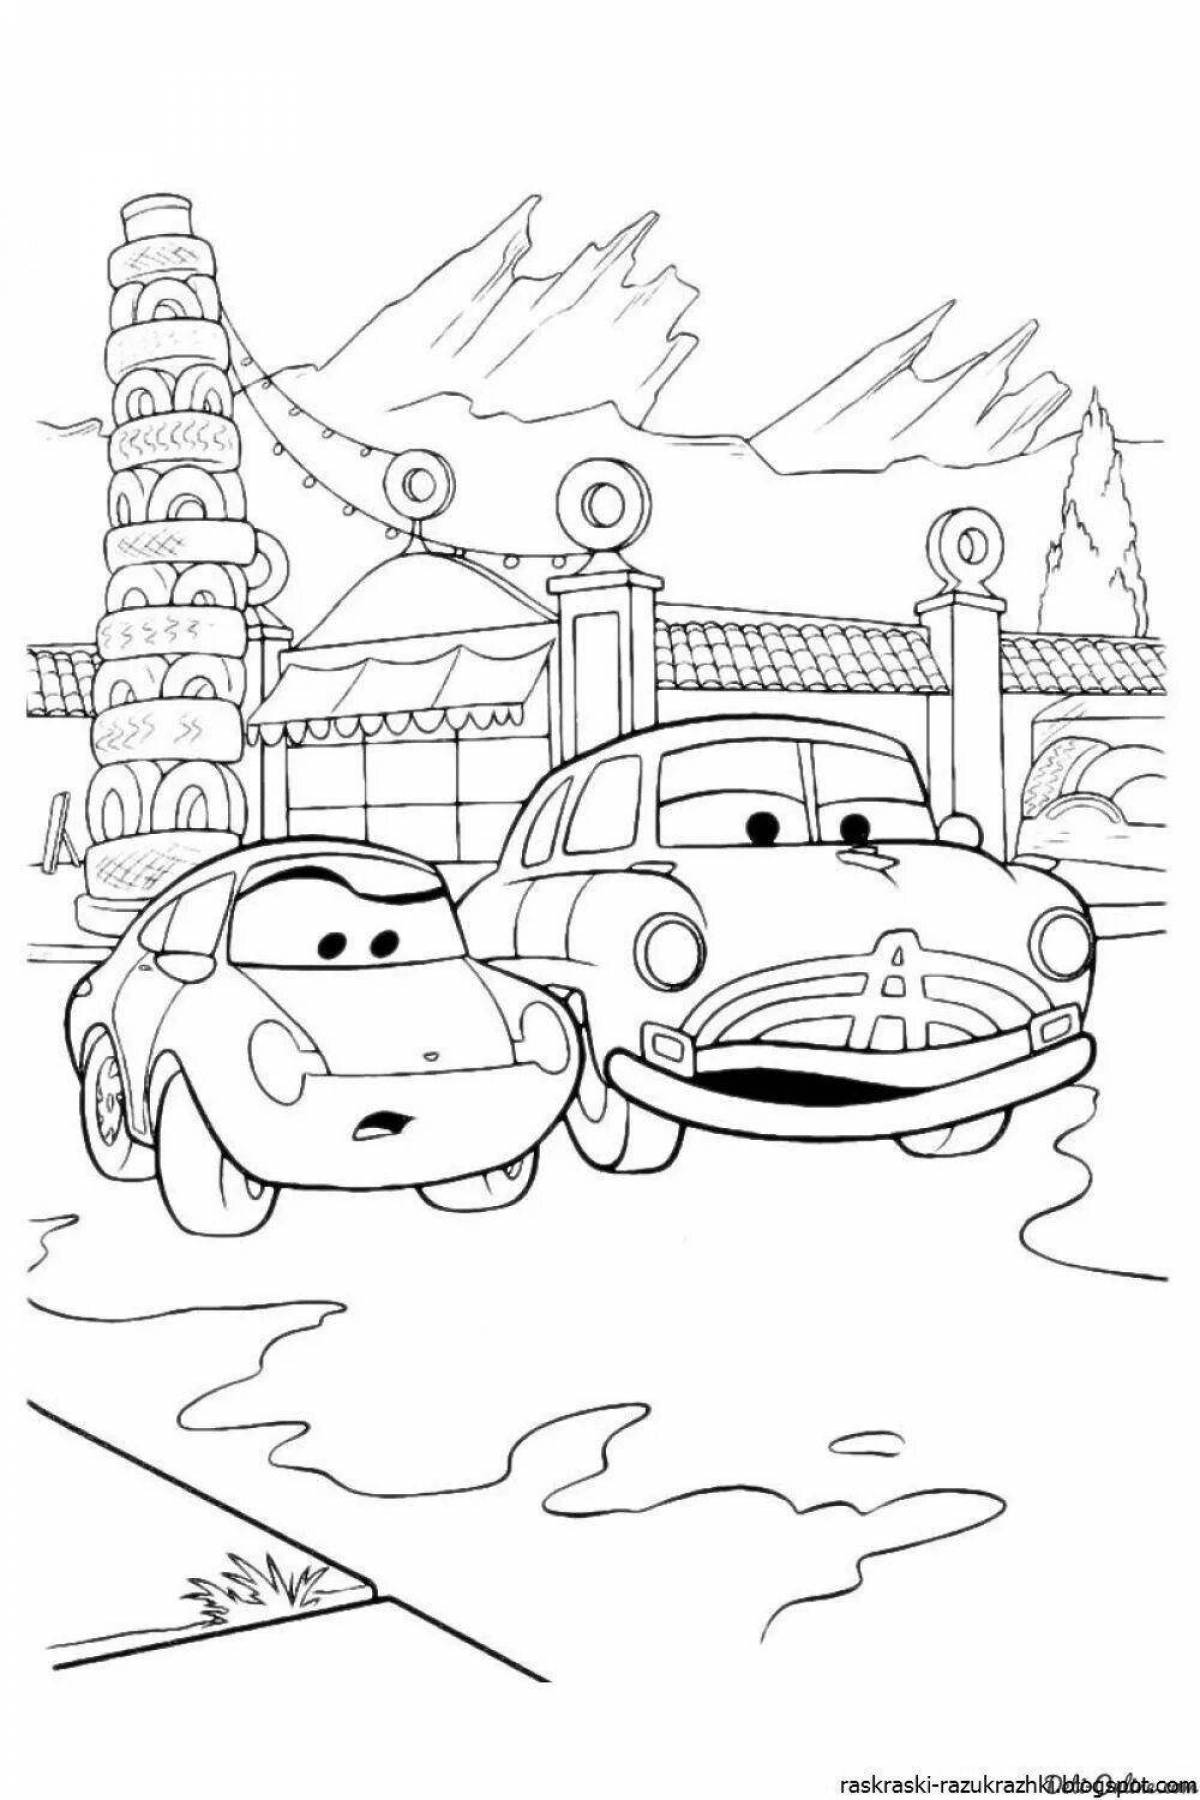 Adorable cars coloring book for children 6-7 years old